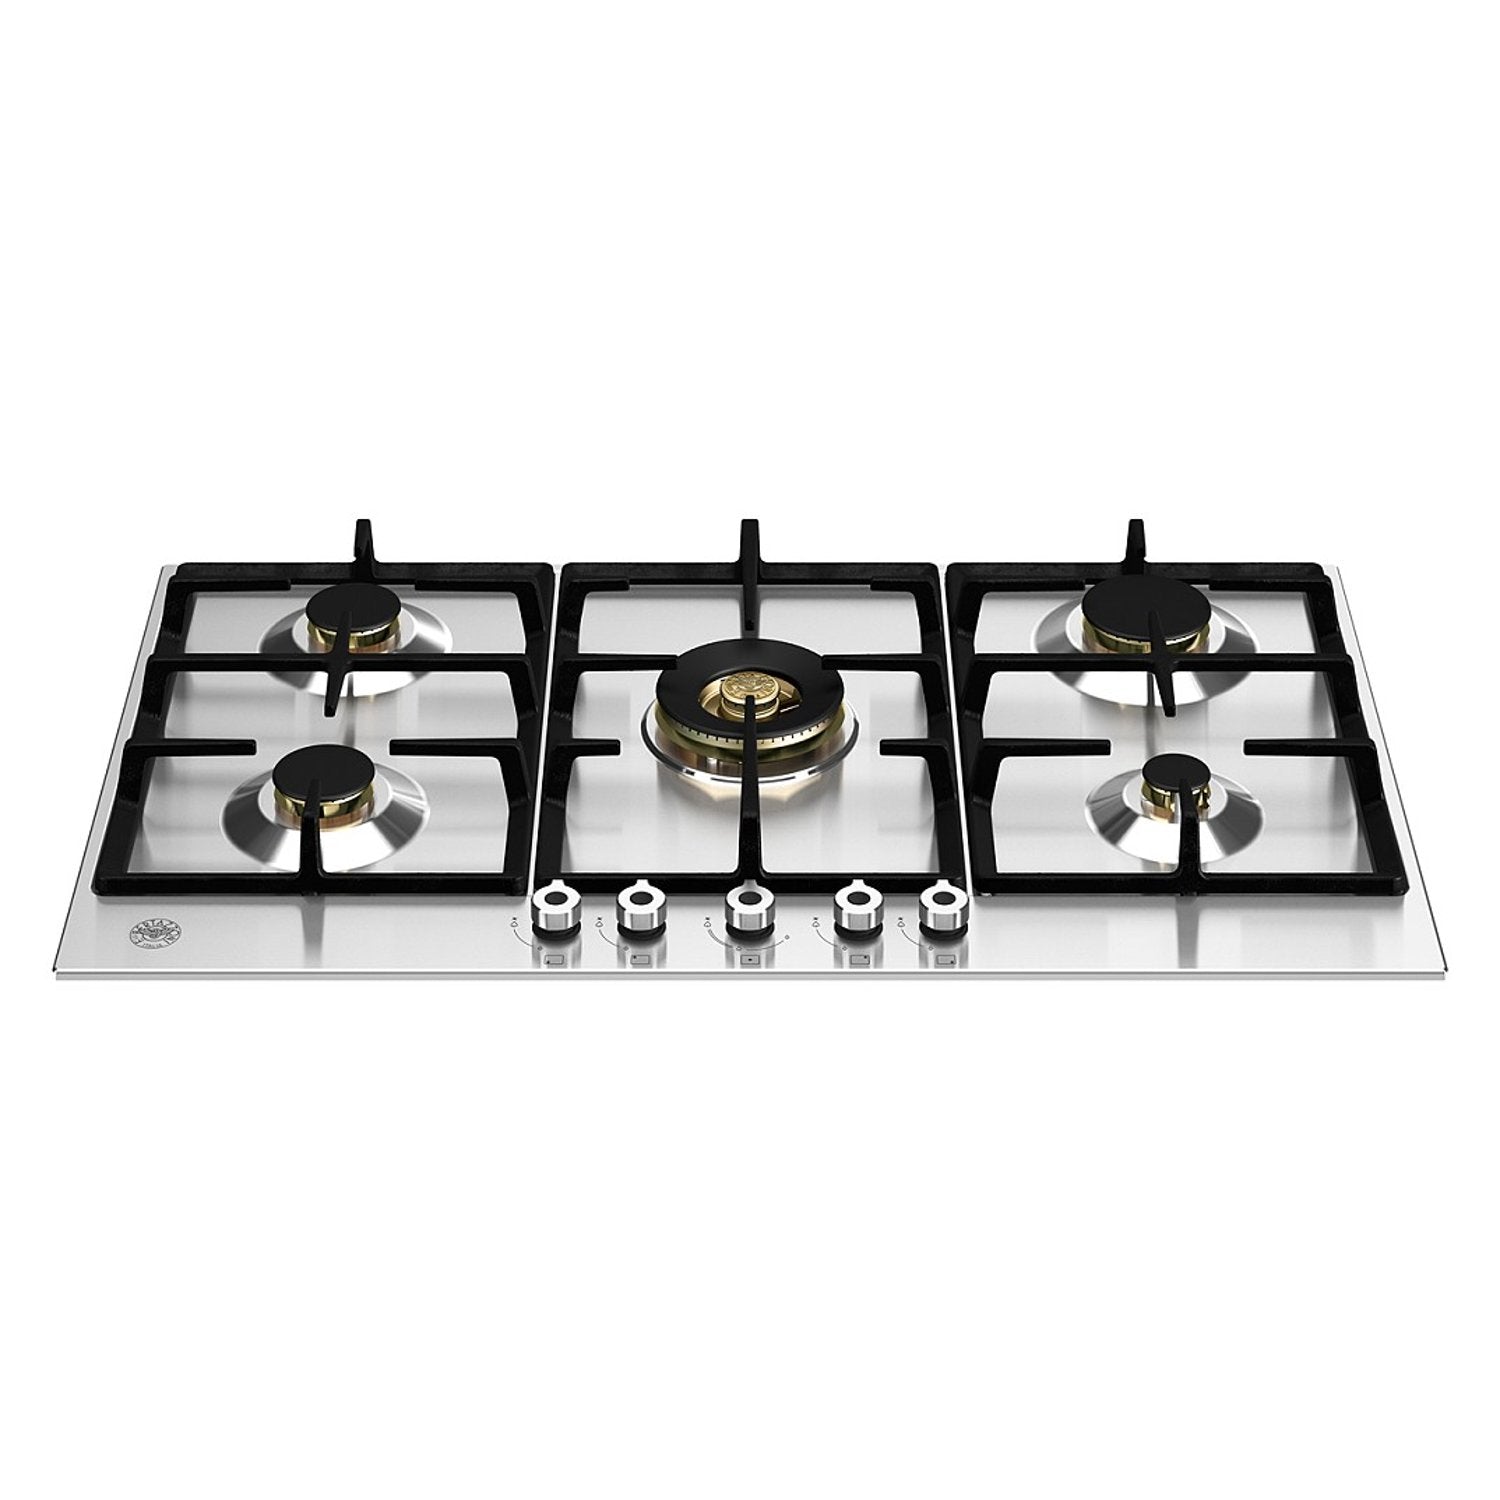 BZON PROFESSIONAL 90CM BUILT-IN GAS HOB